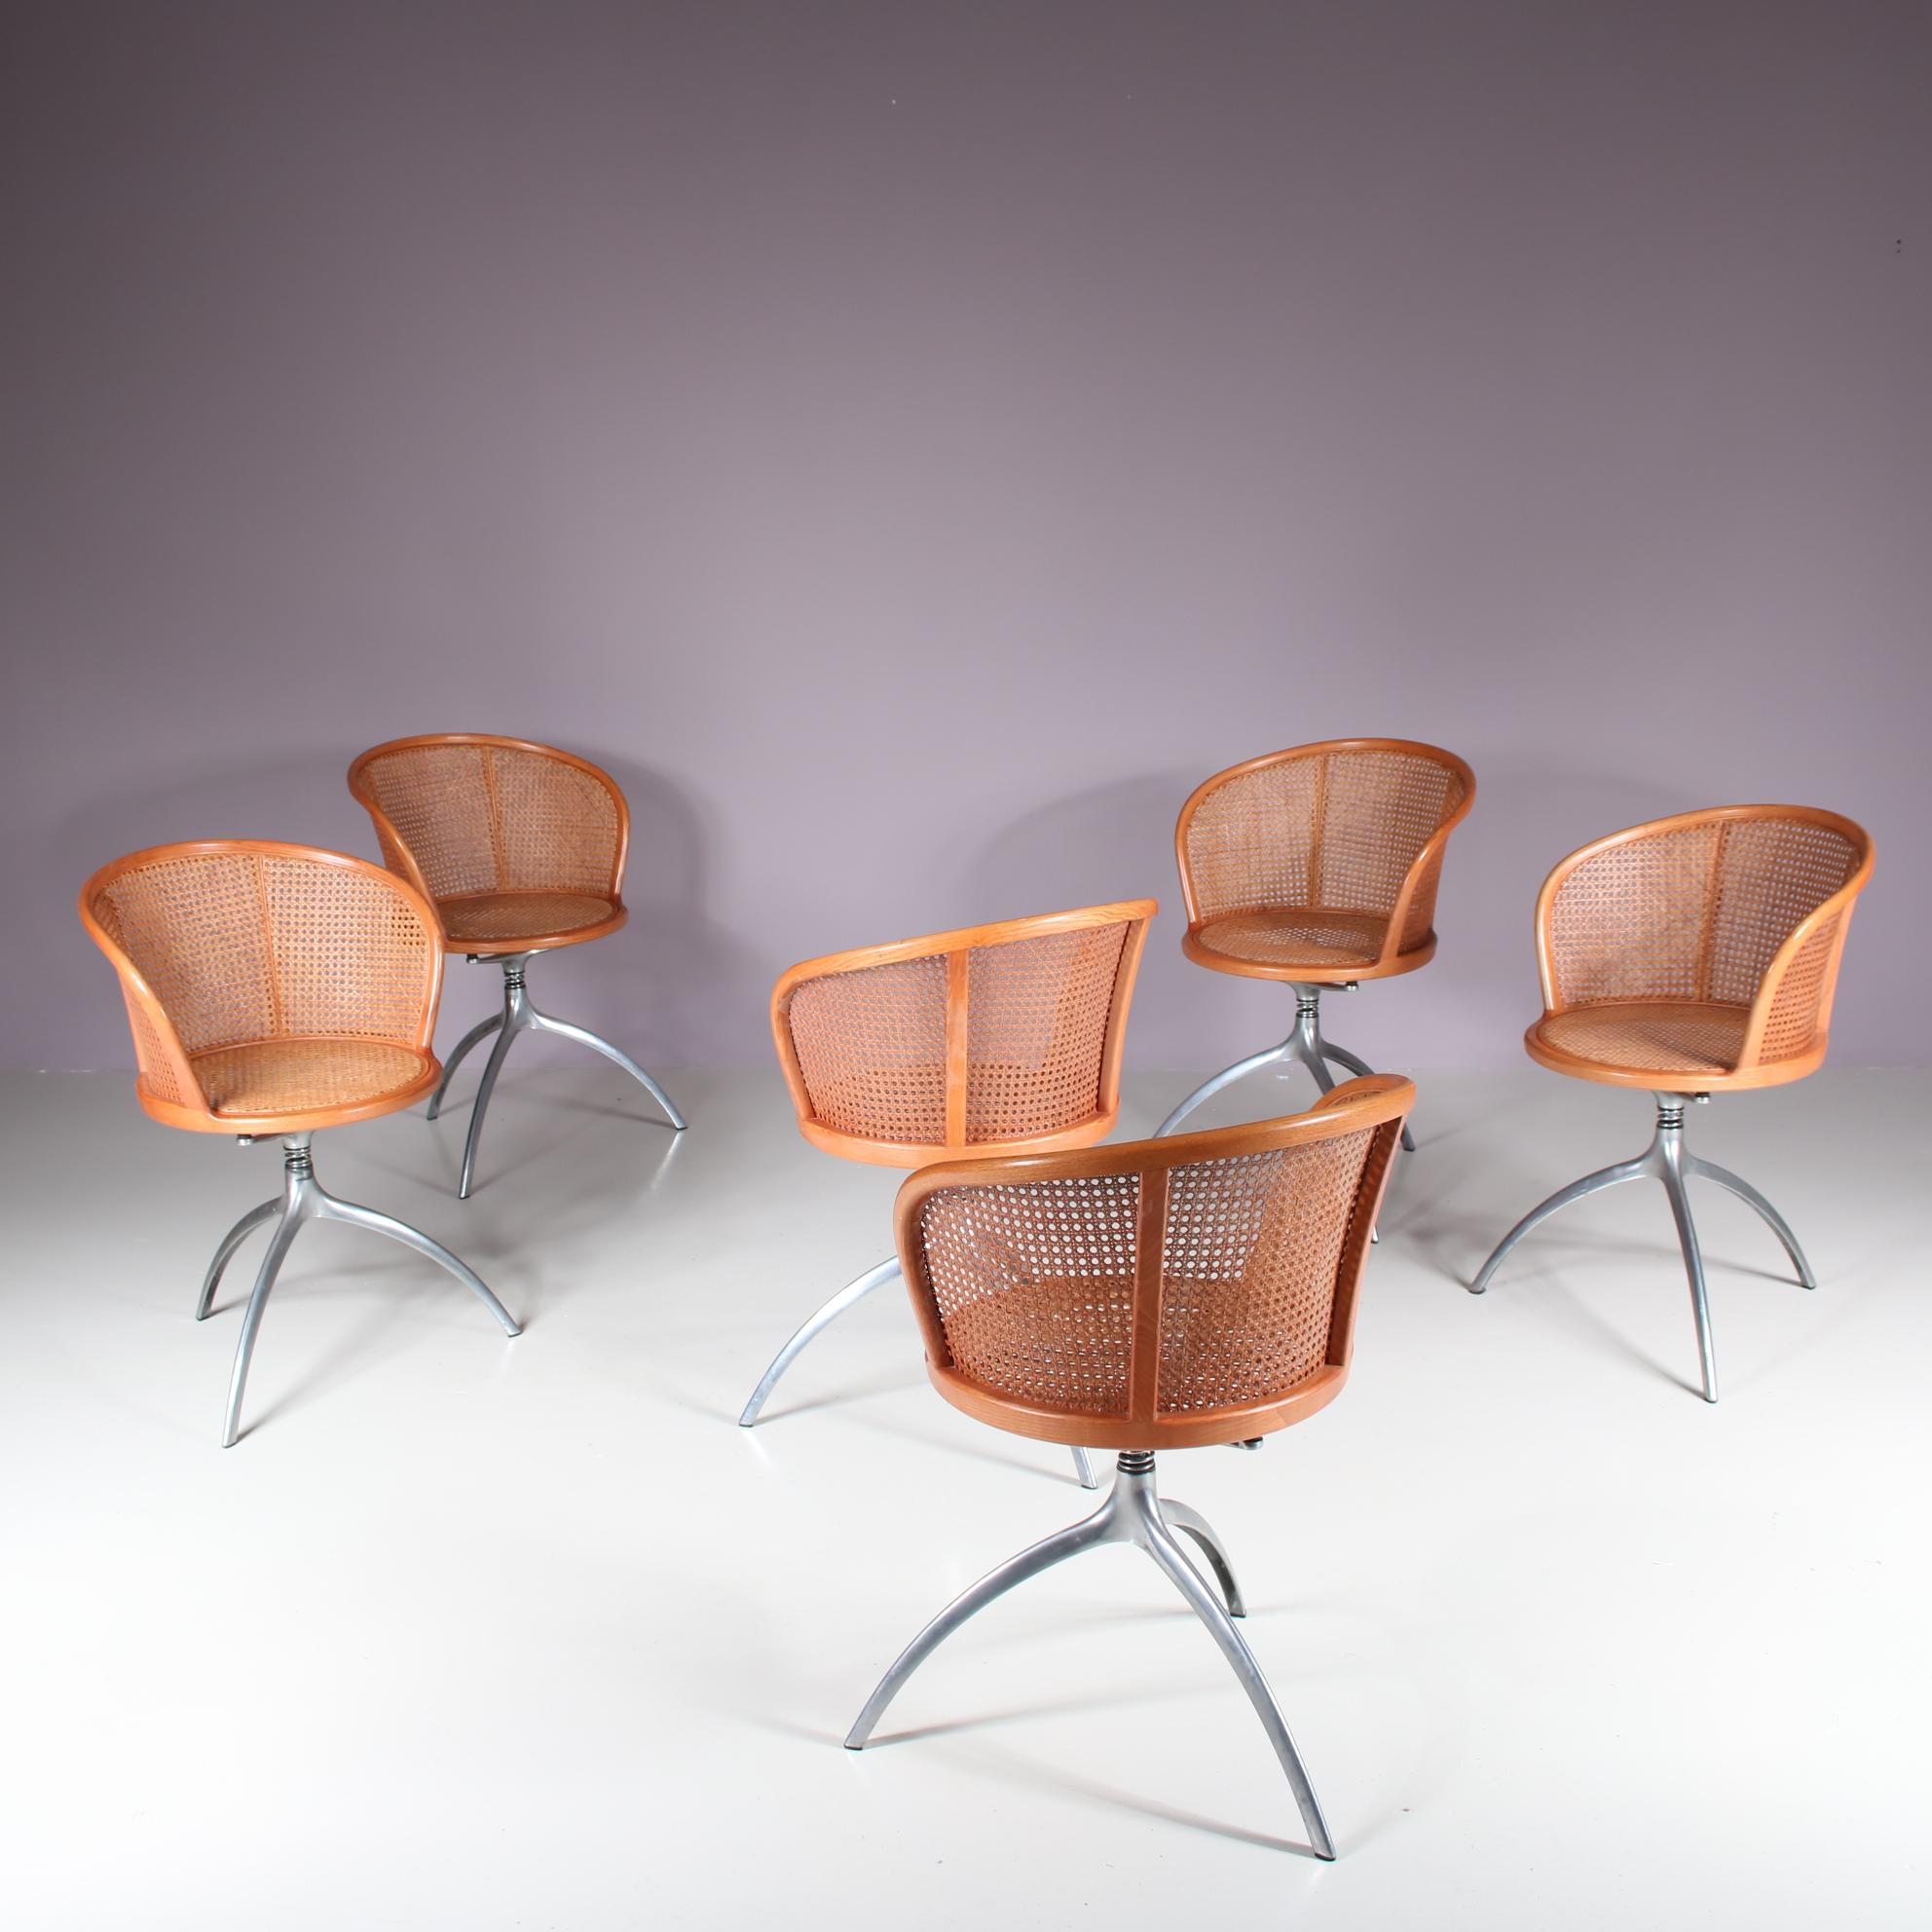 Late 20th Century Set of 6 “Young Lady” Chairs by Paolo Rizzatto for Alias, Italy 1990 For Sale